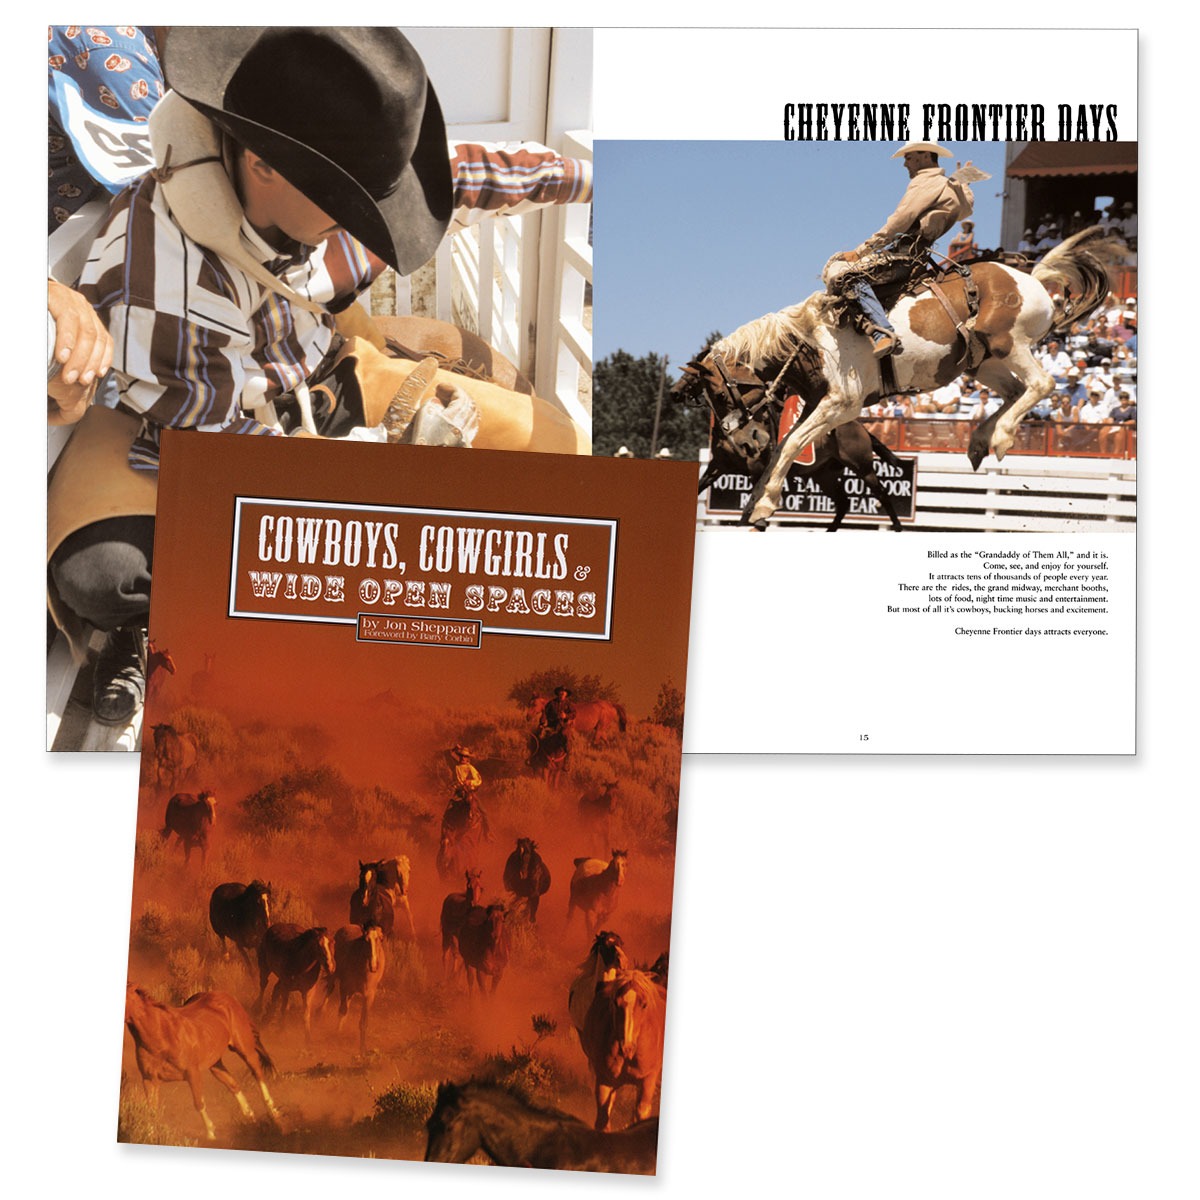 Cowboys, Cowgirls & Wide Open Spaces book design by Daryl Stevens